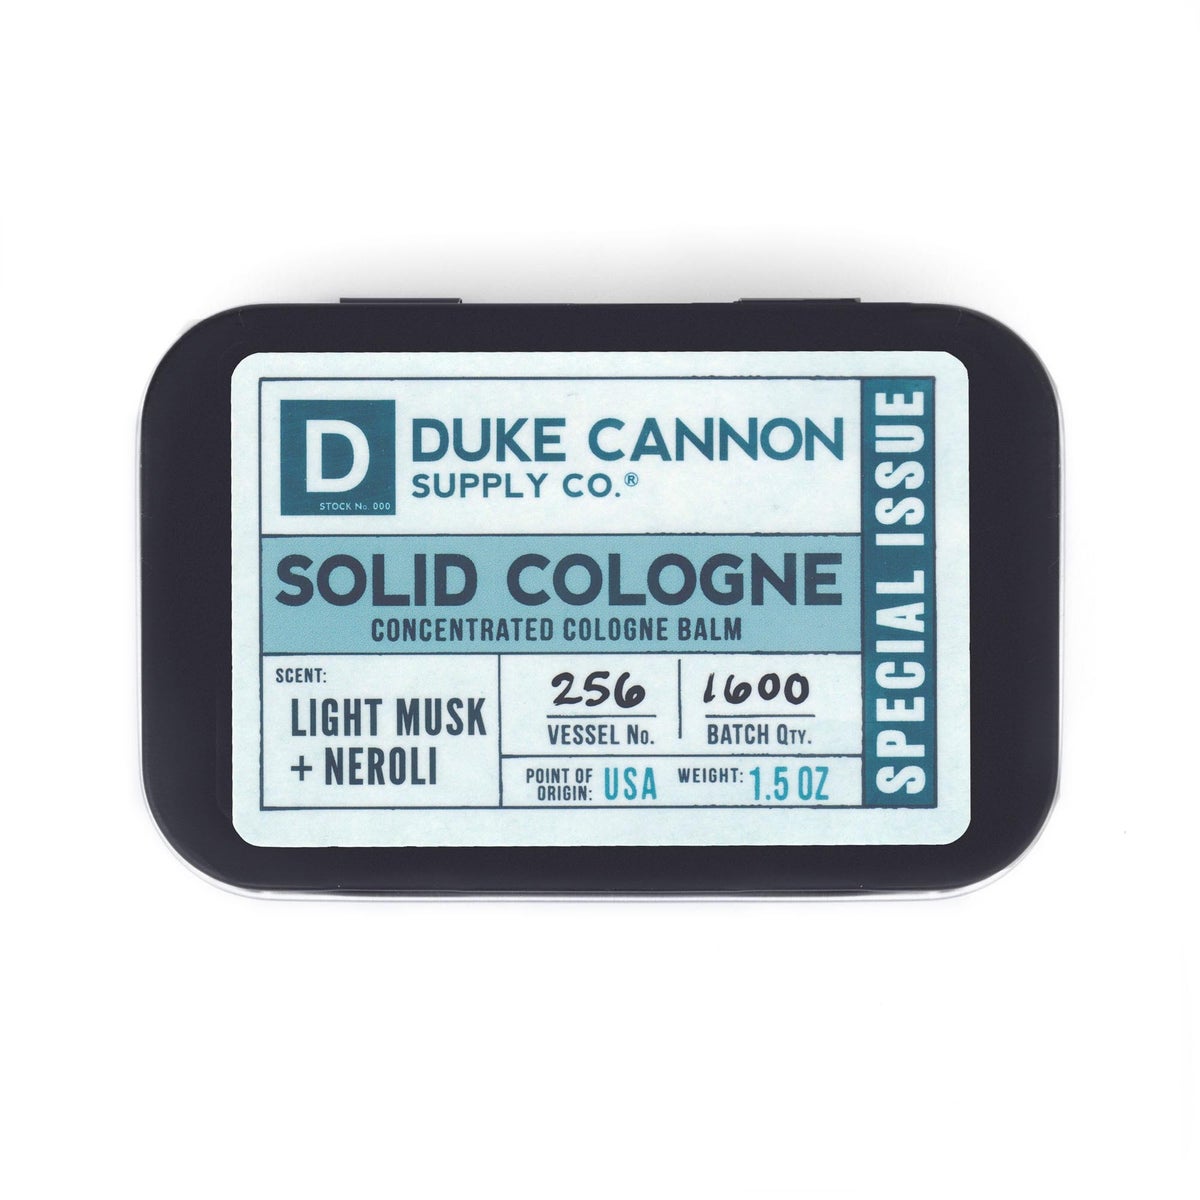 Solid Cologne - Light Musk and Neroli